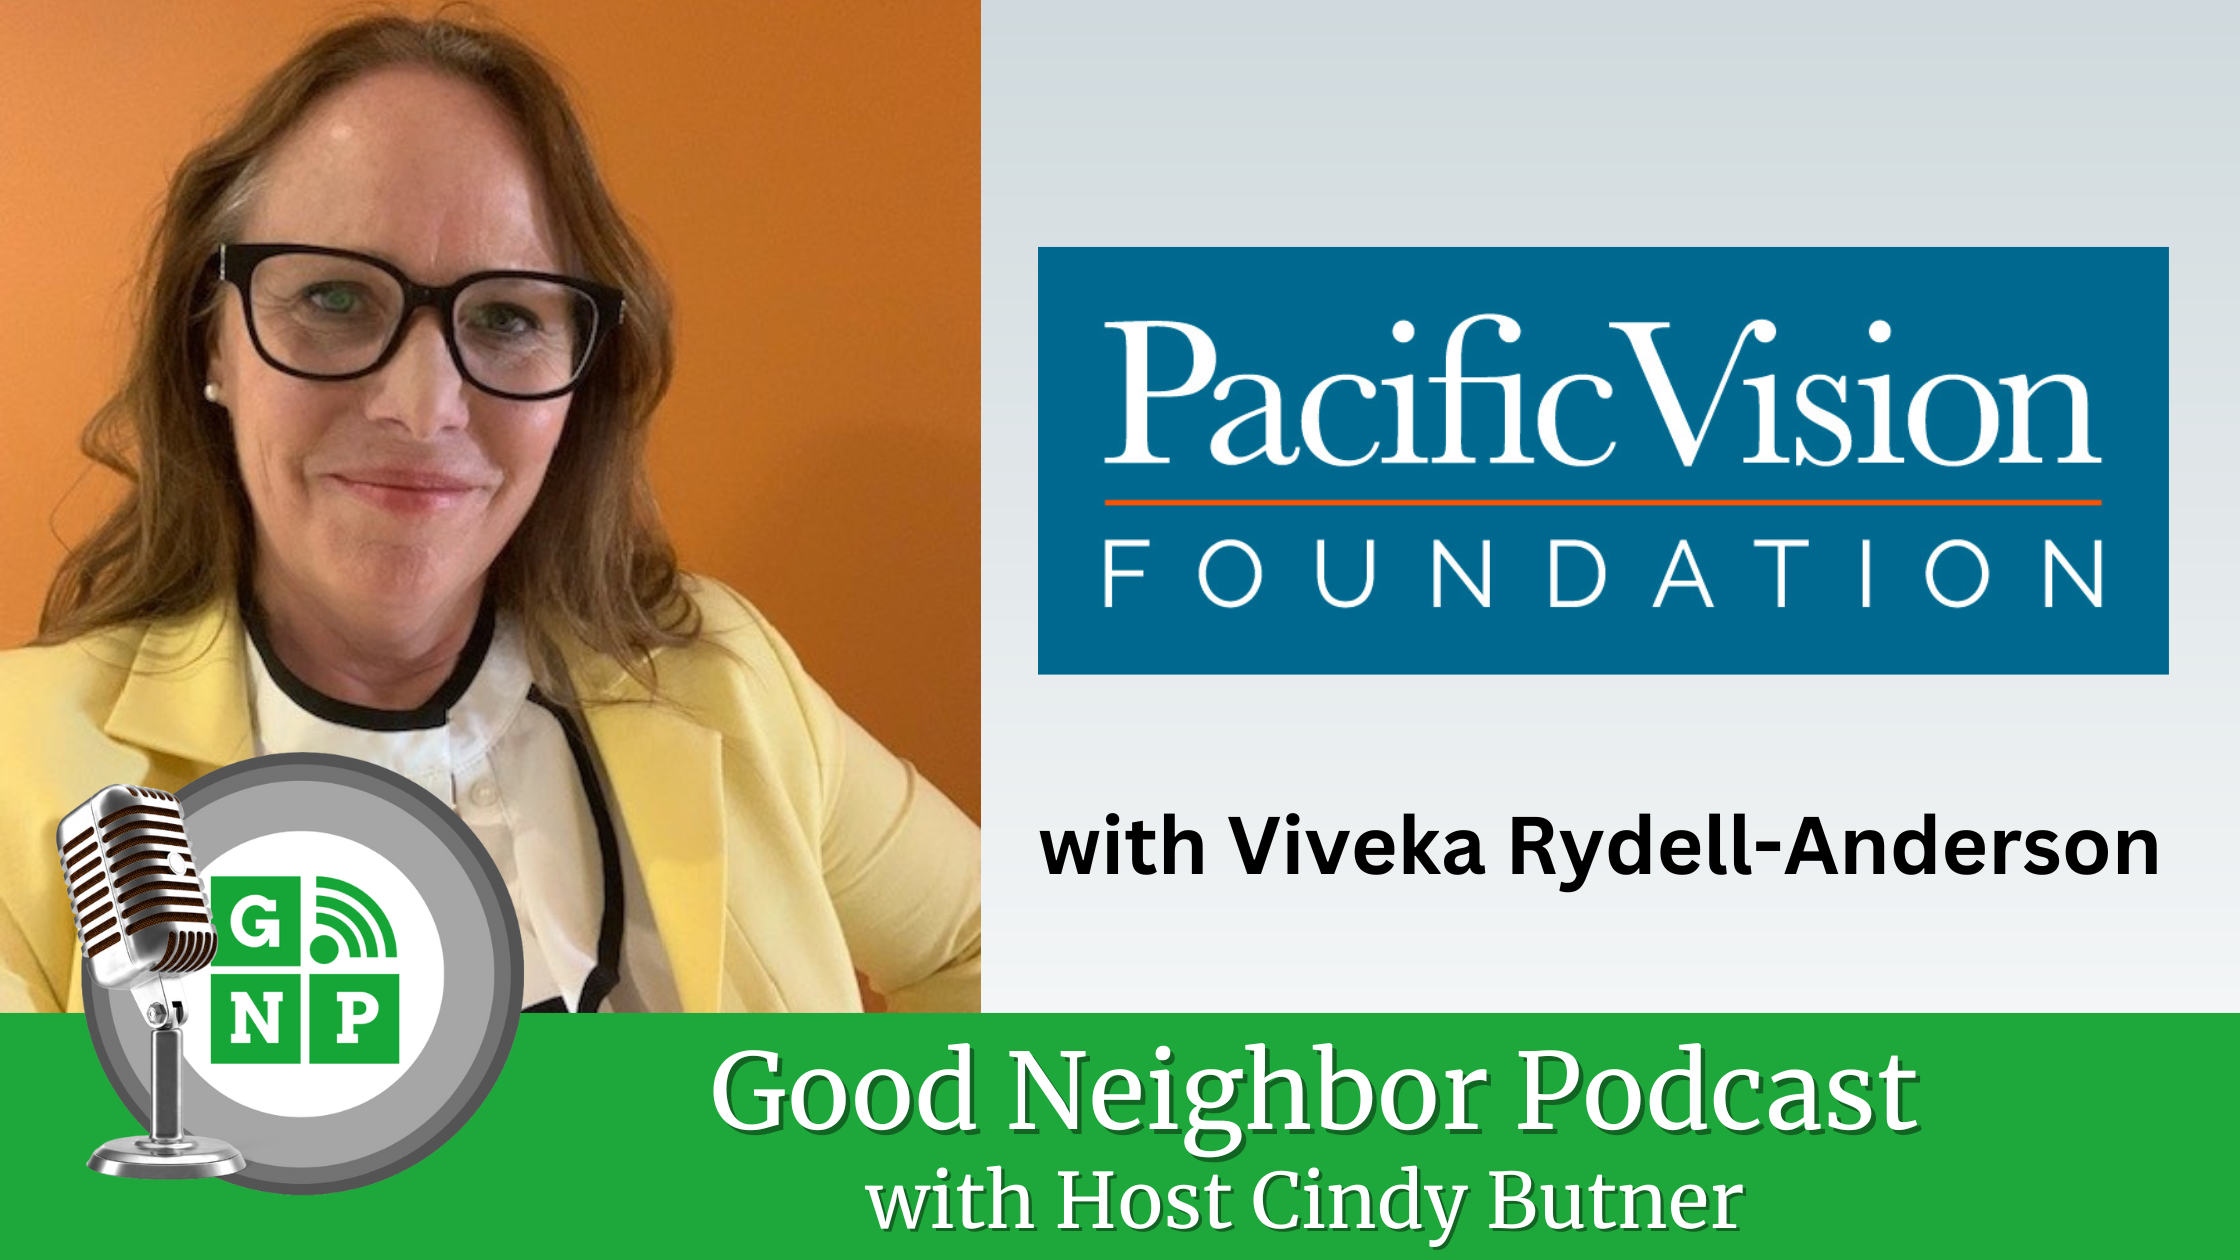 EP #15: Pacific Vision Foundation with Viveka Rydell-Anderson